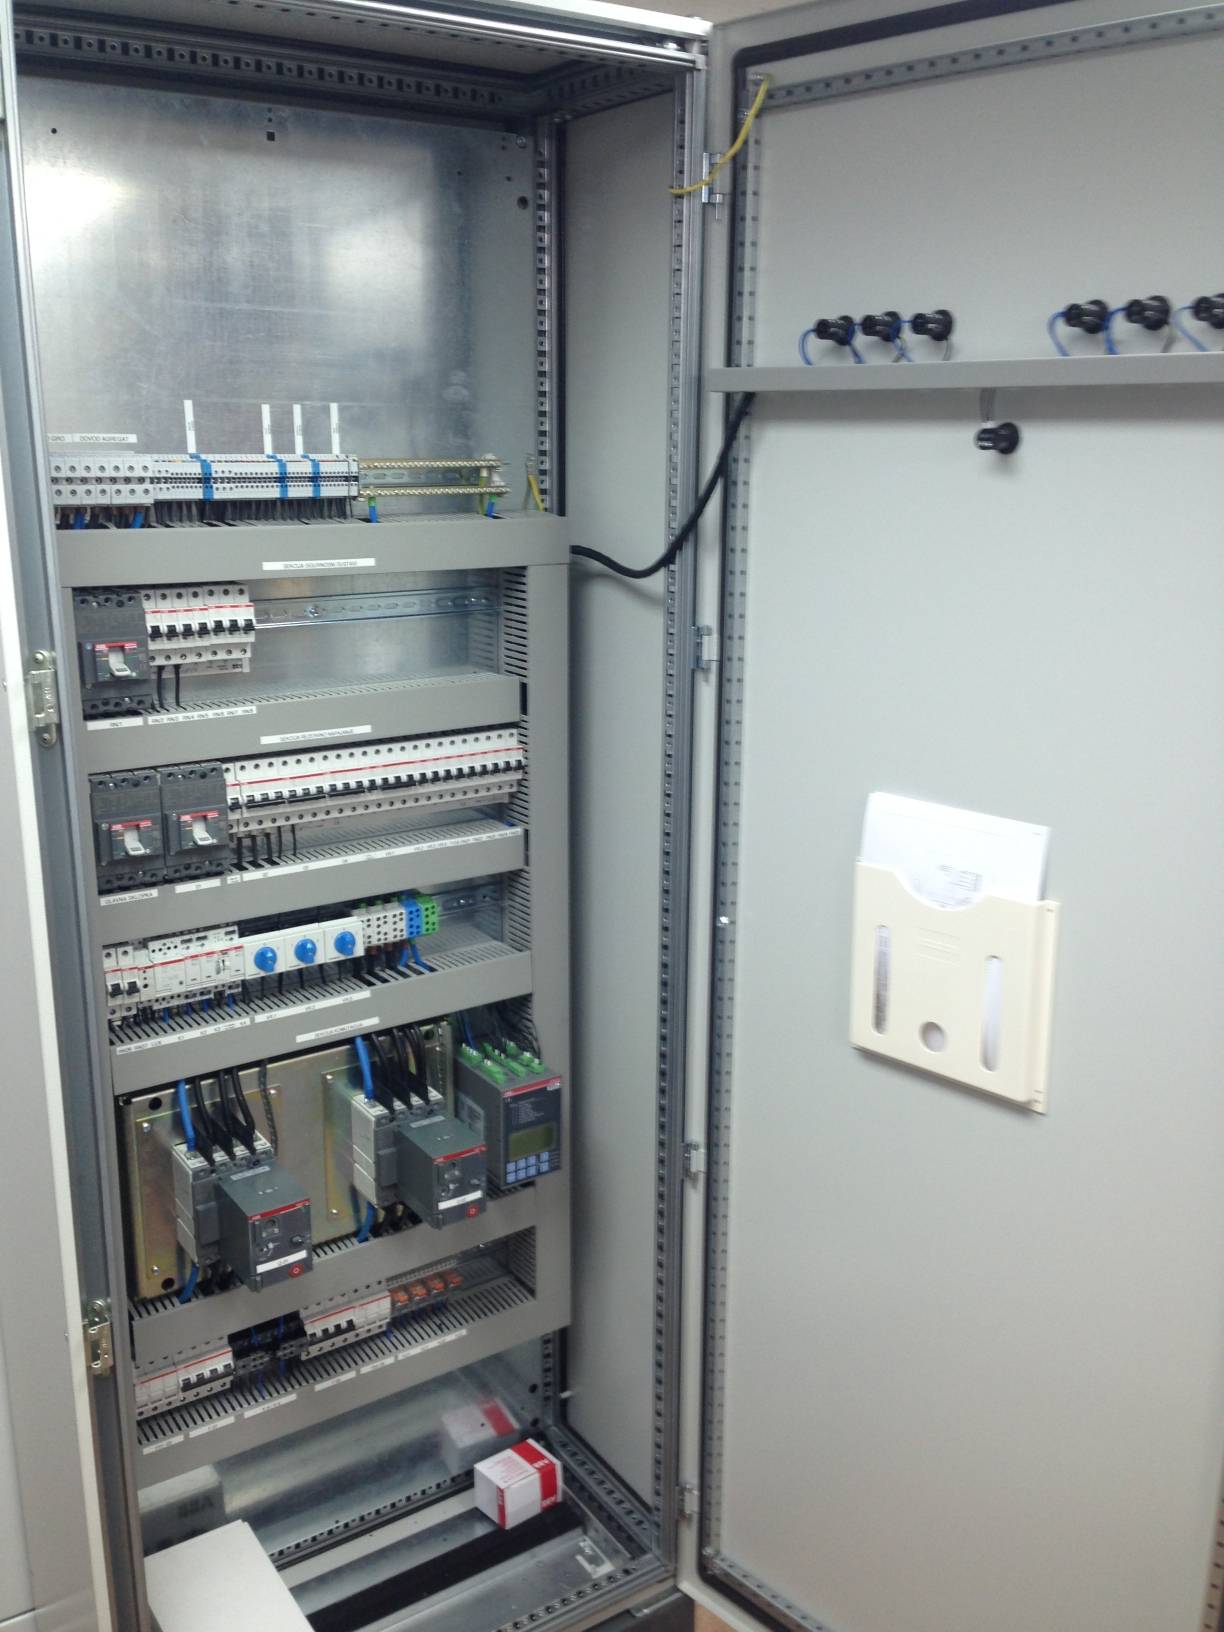  Switch cabinets